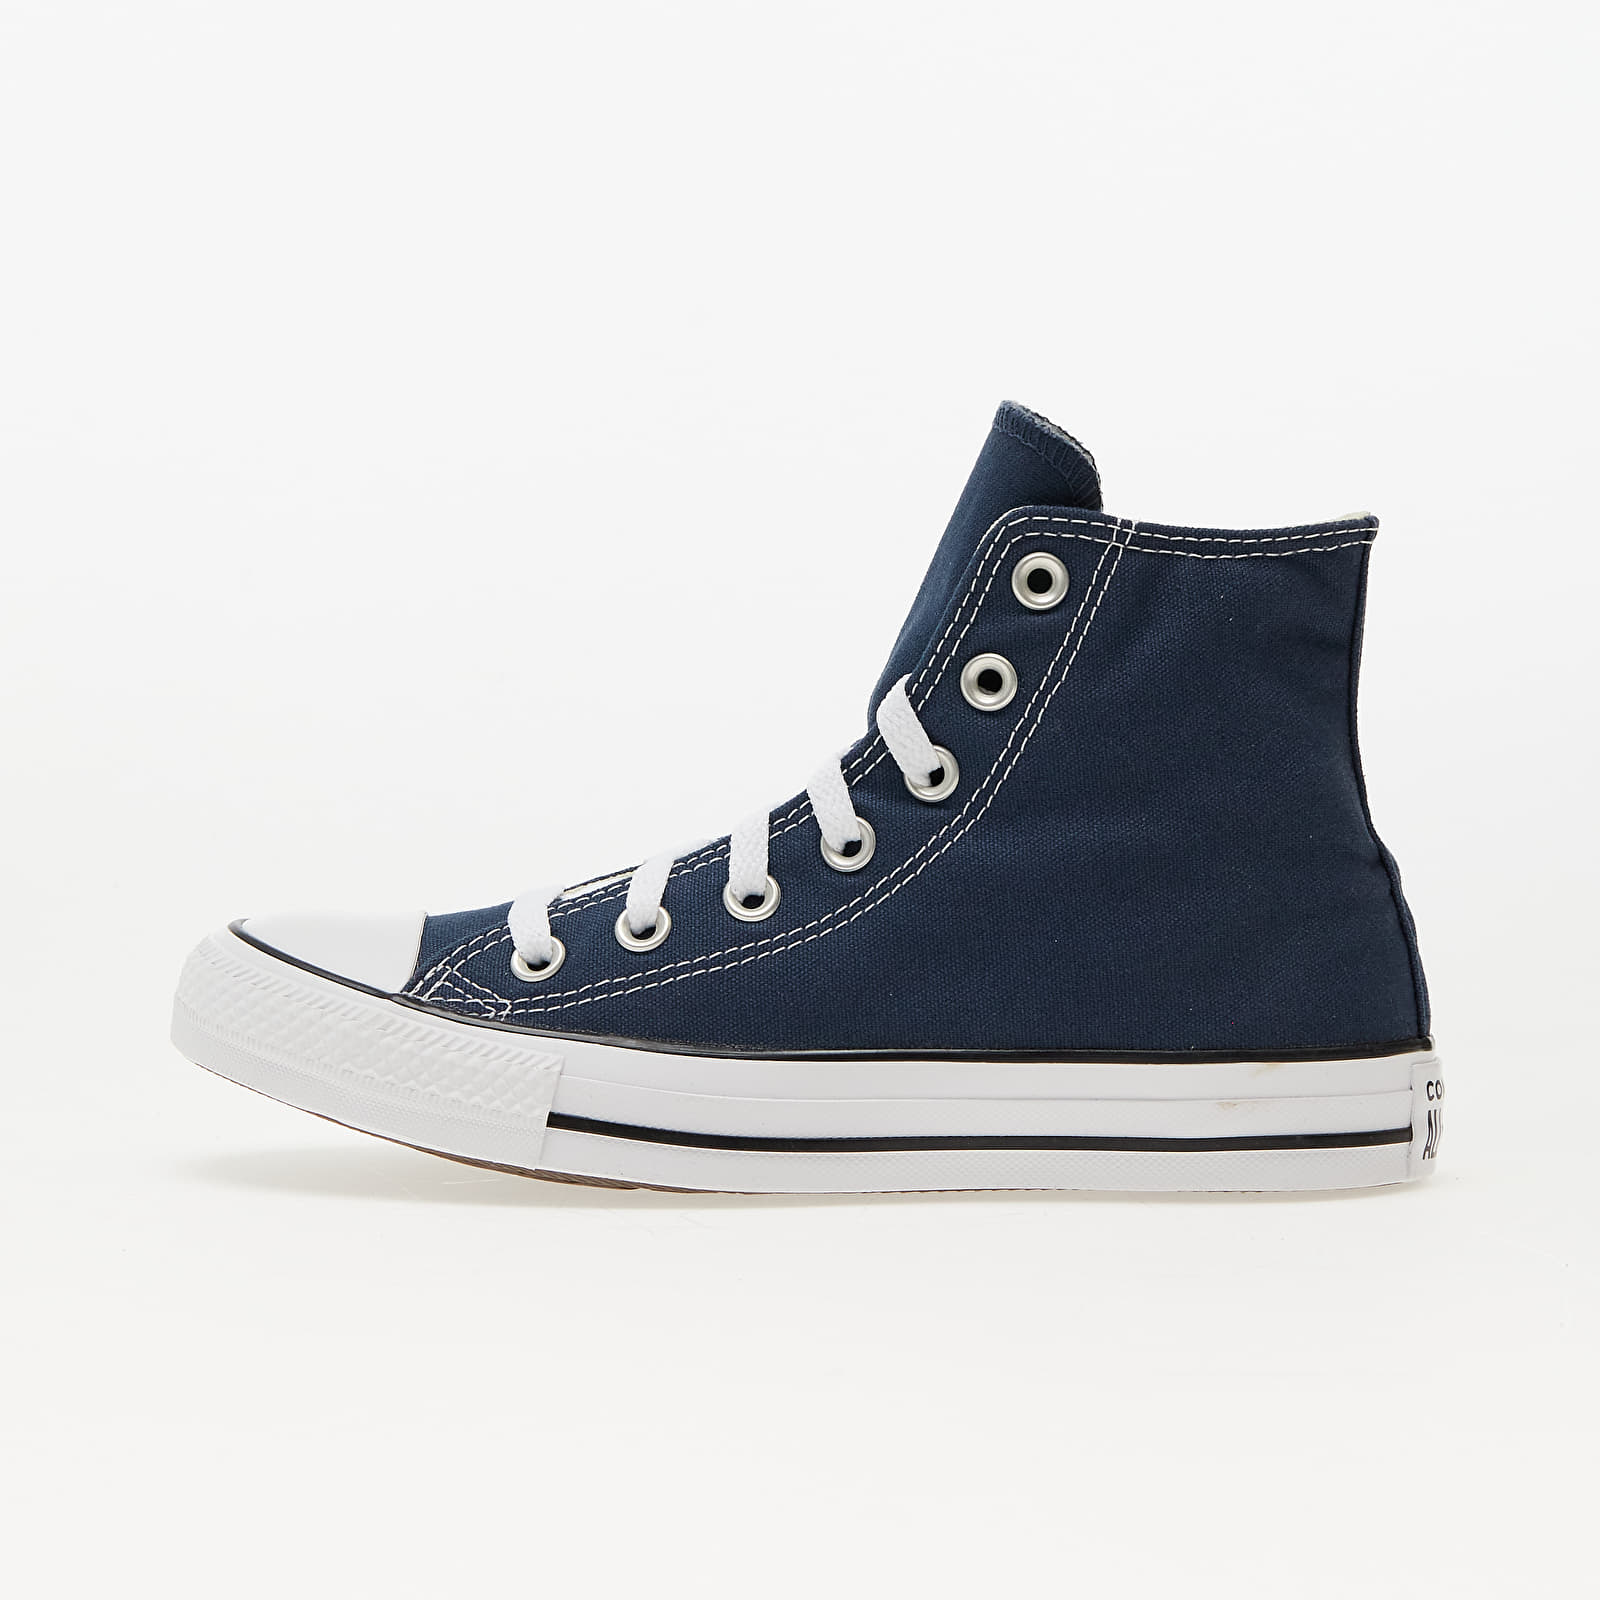 Mens mid tops & high tops Converse All Star High Trainers - Navy